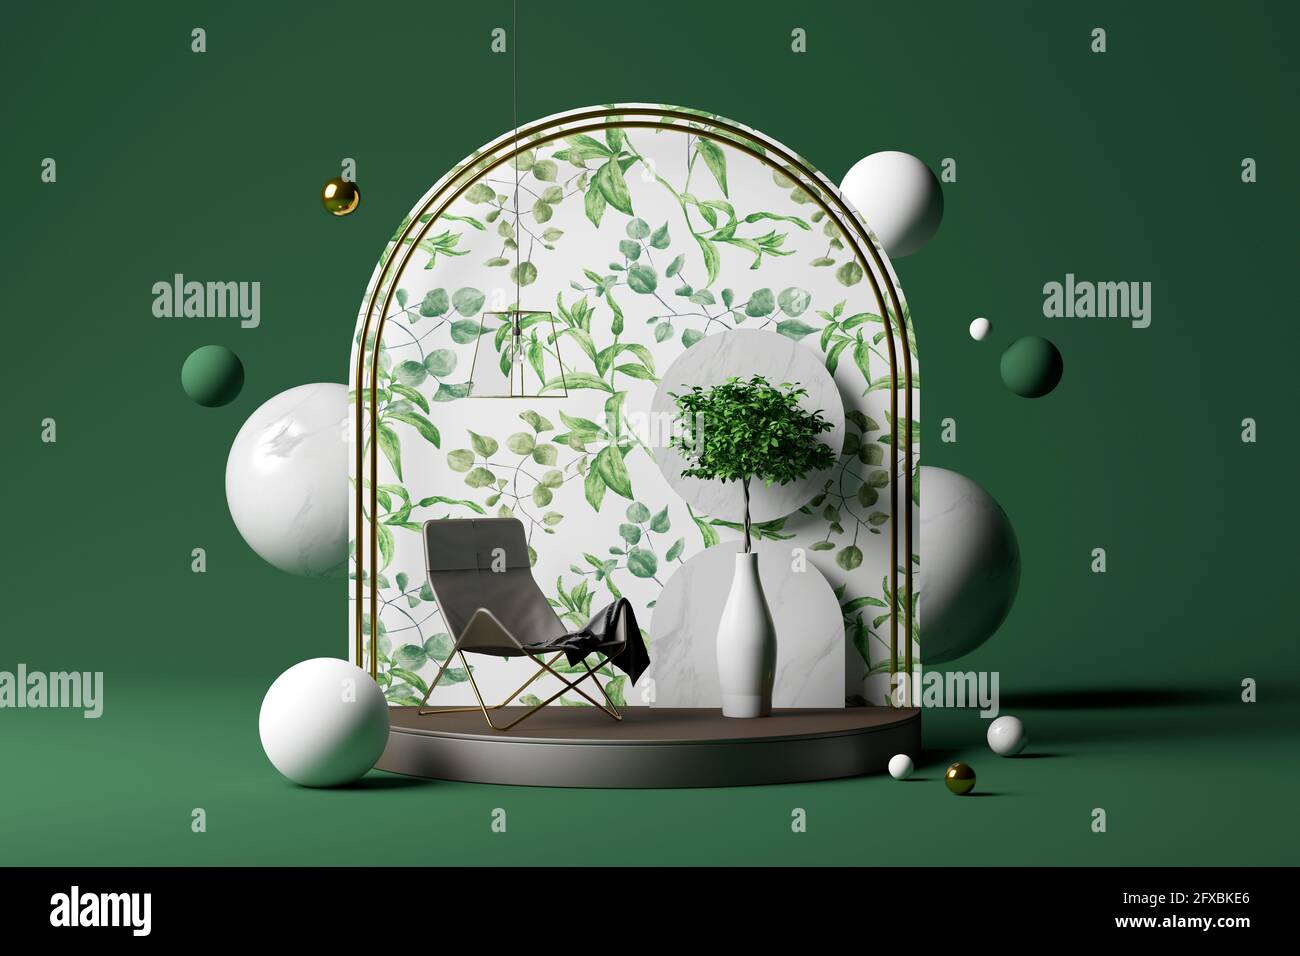 Three dimensional render of potted plant, empty chair and decorative arch on pedestal with various spheres floating behind against green background Stock Photo